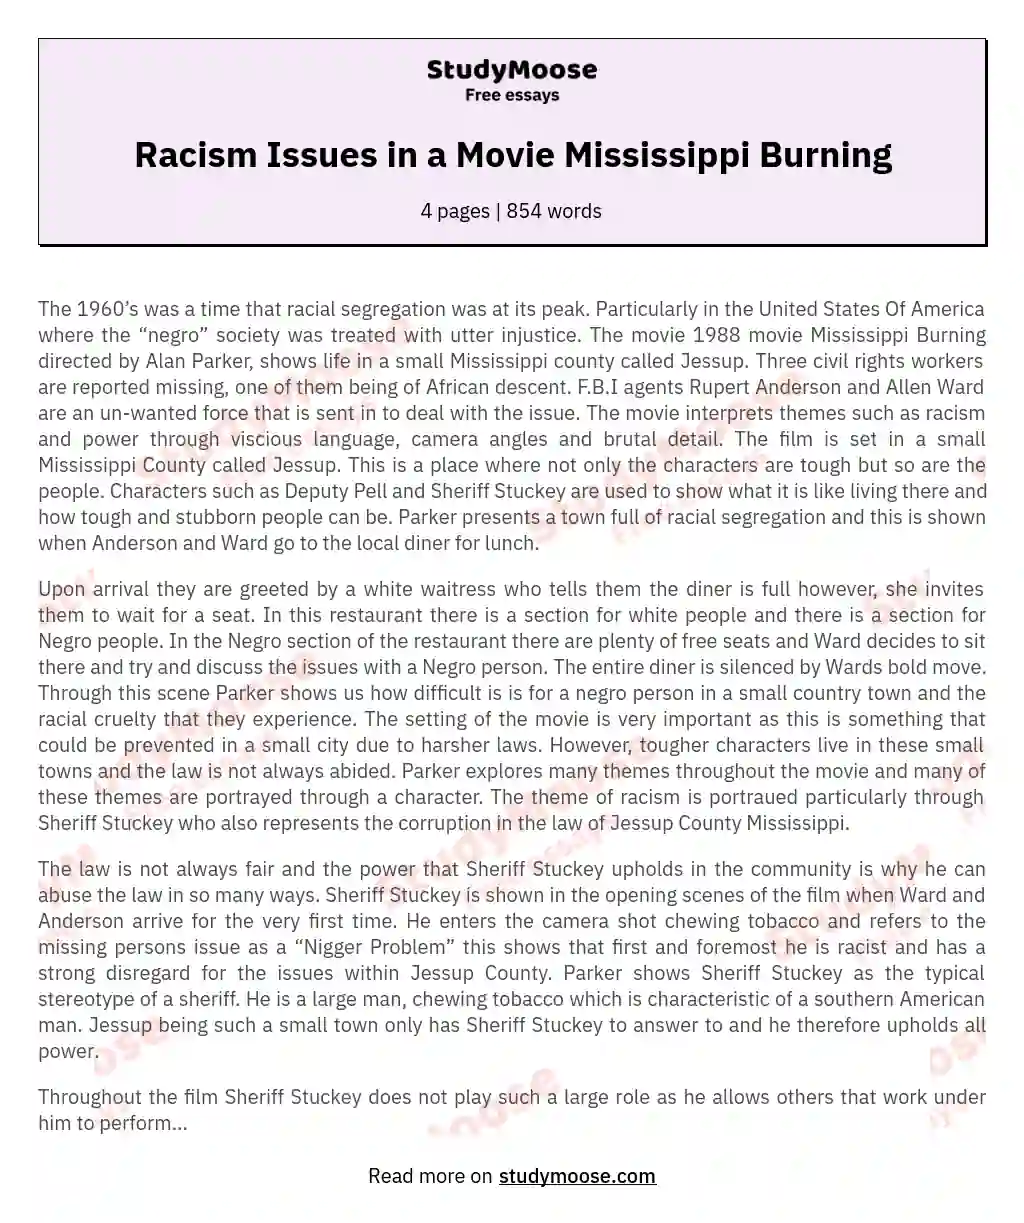 Racism Issues in a Movie Mississippi Burning